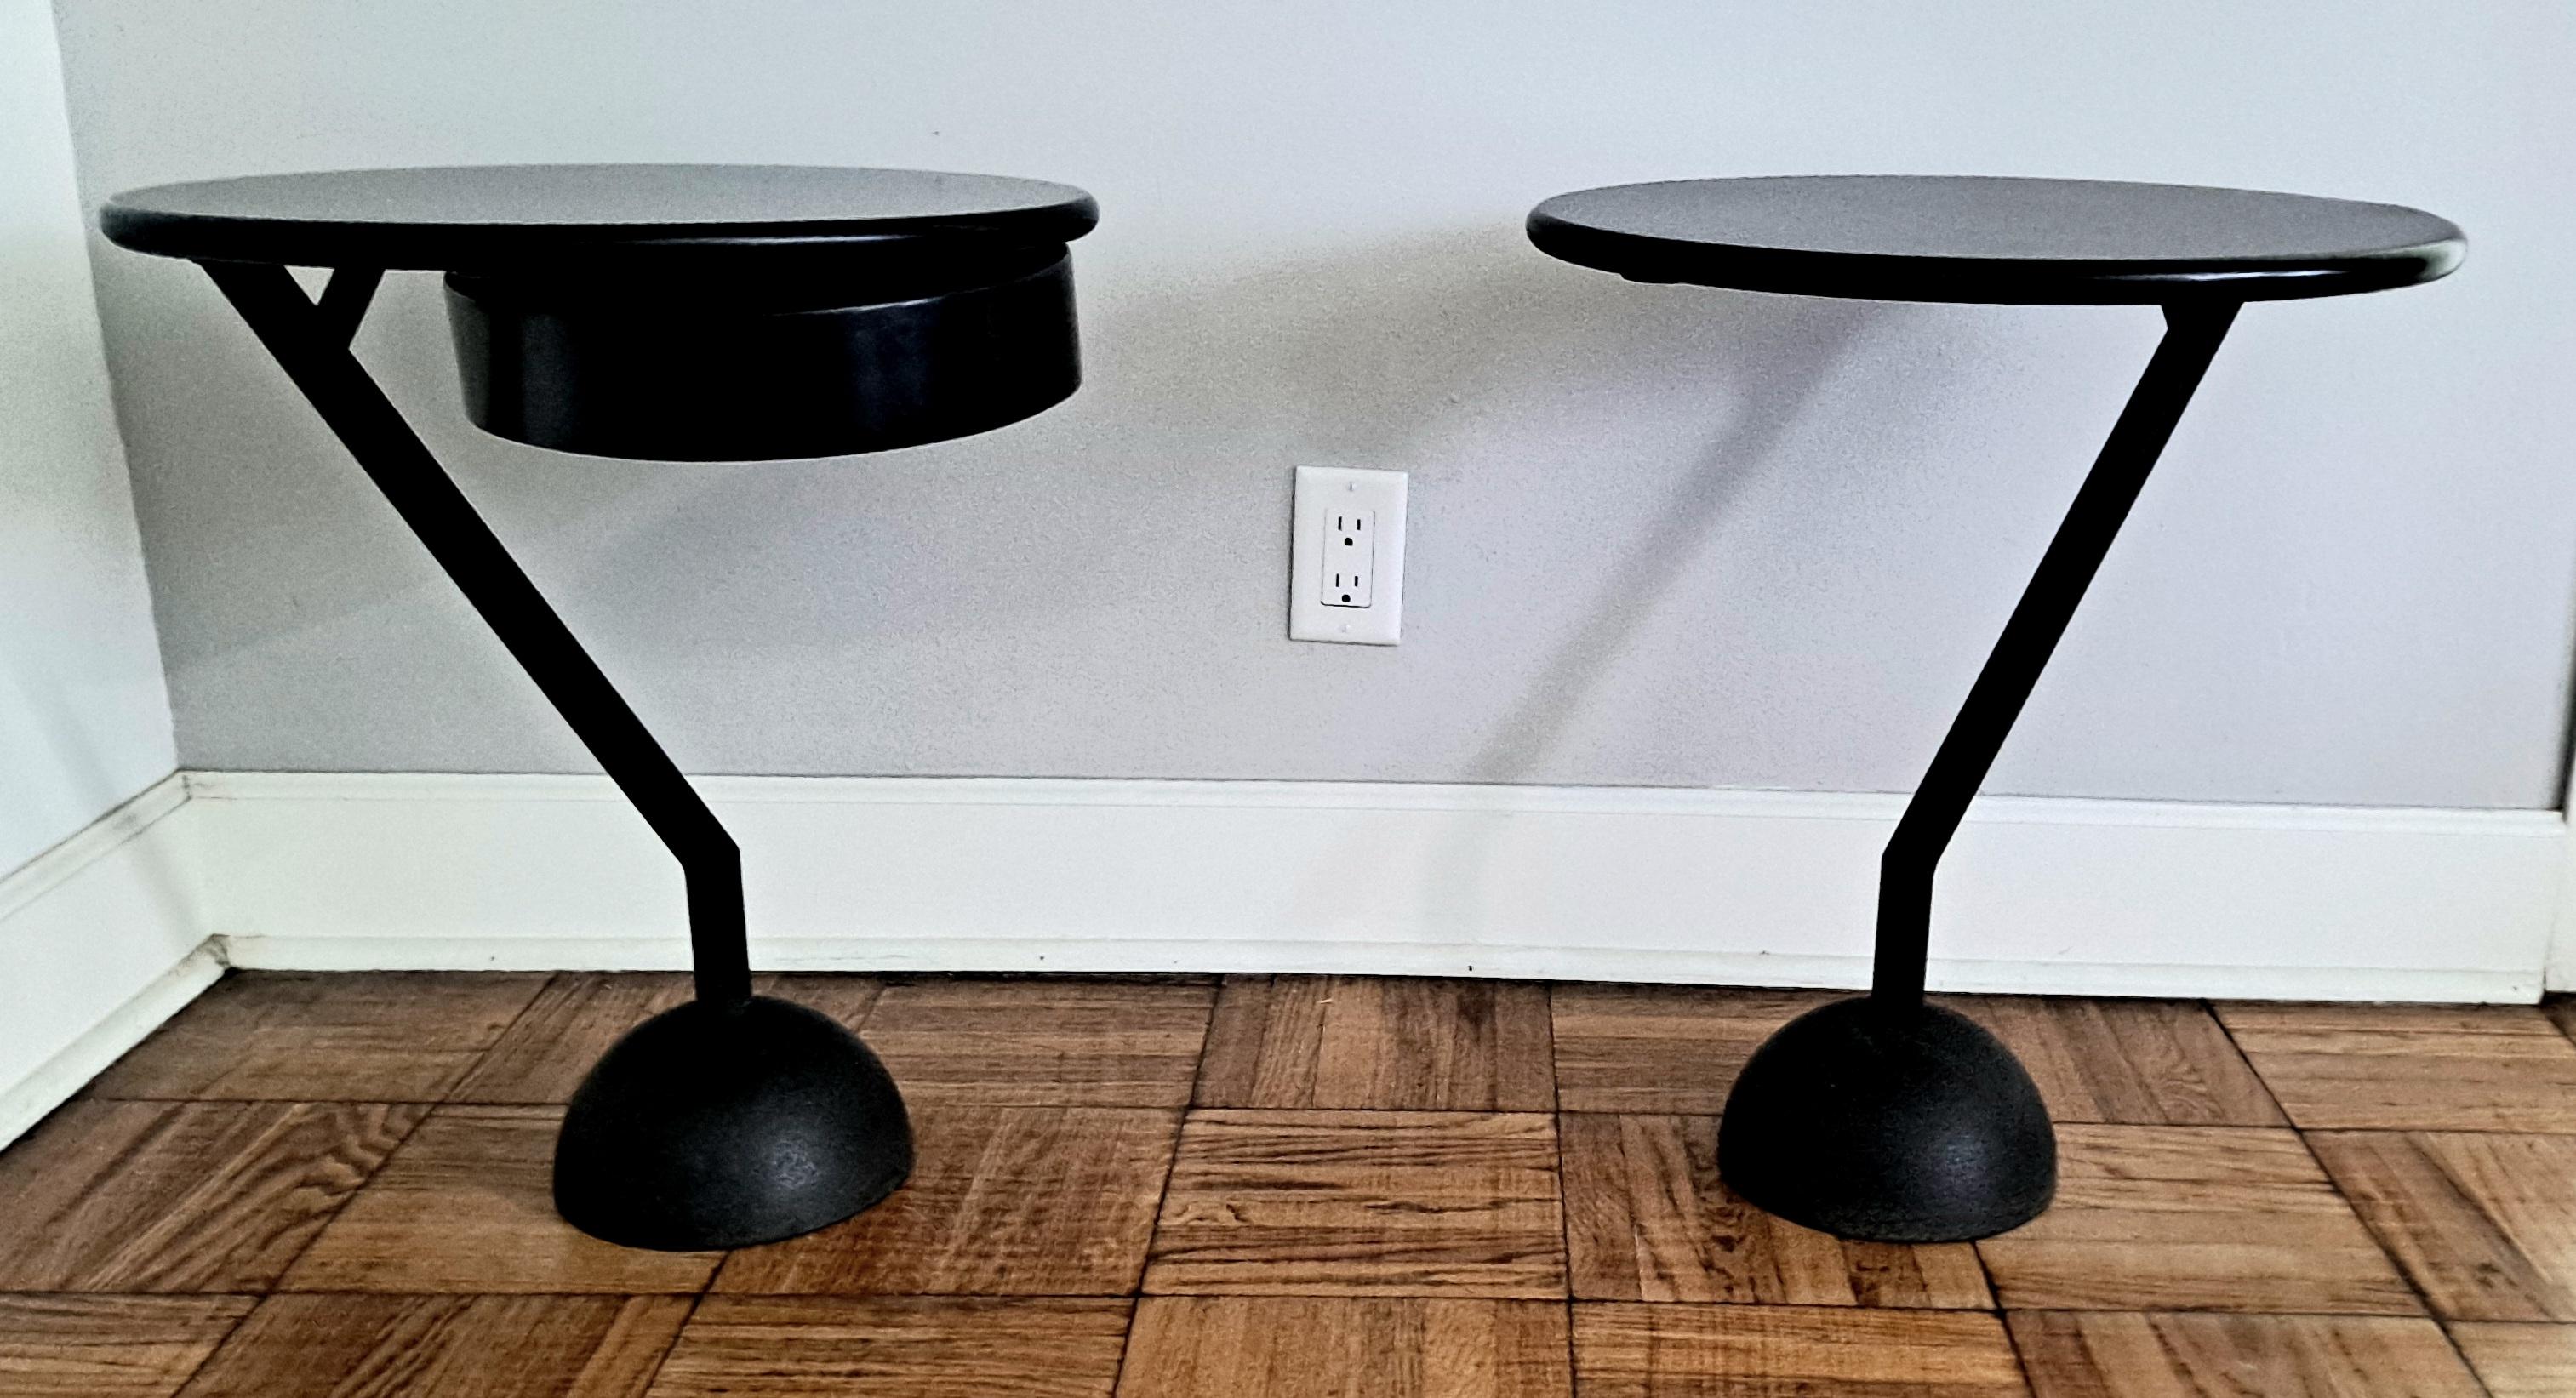 Pair of Italian side tables by Gimo Fero Venation artist .He made 6 of the tables like this and numbered on the bottom.
The base is metal and the top is made of wood .One of the nightstand have the drawer as shown on the photos .

USA Continental in